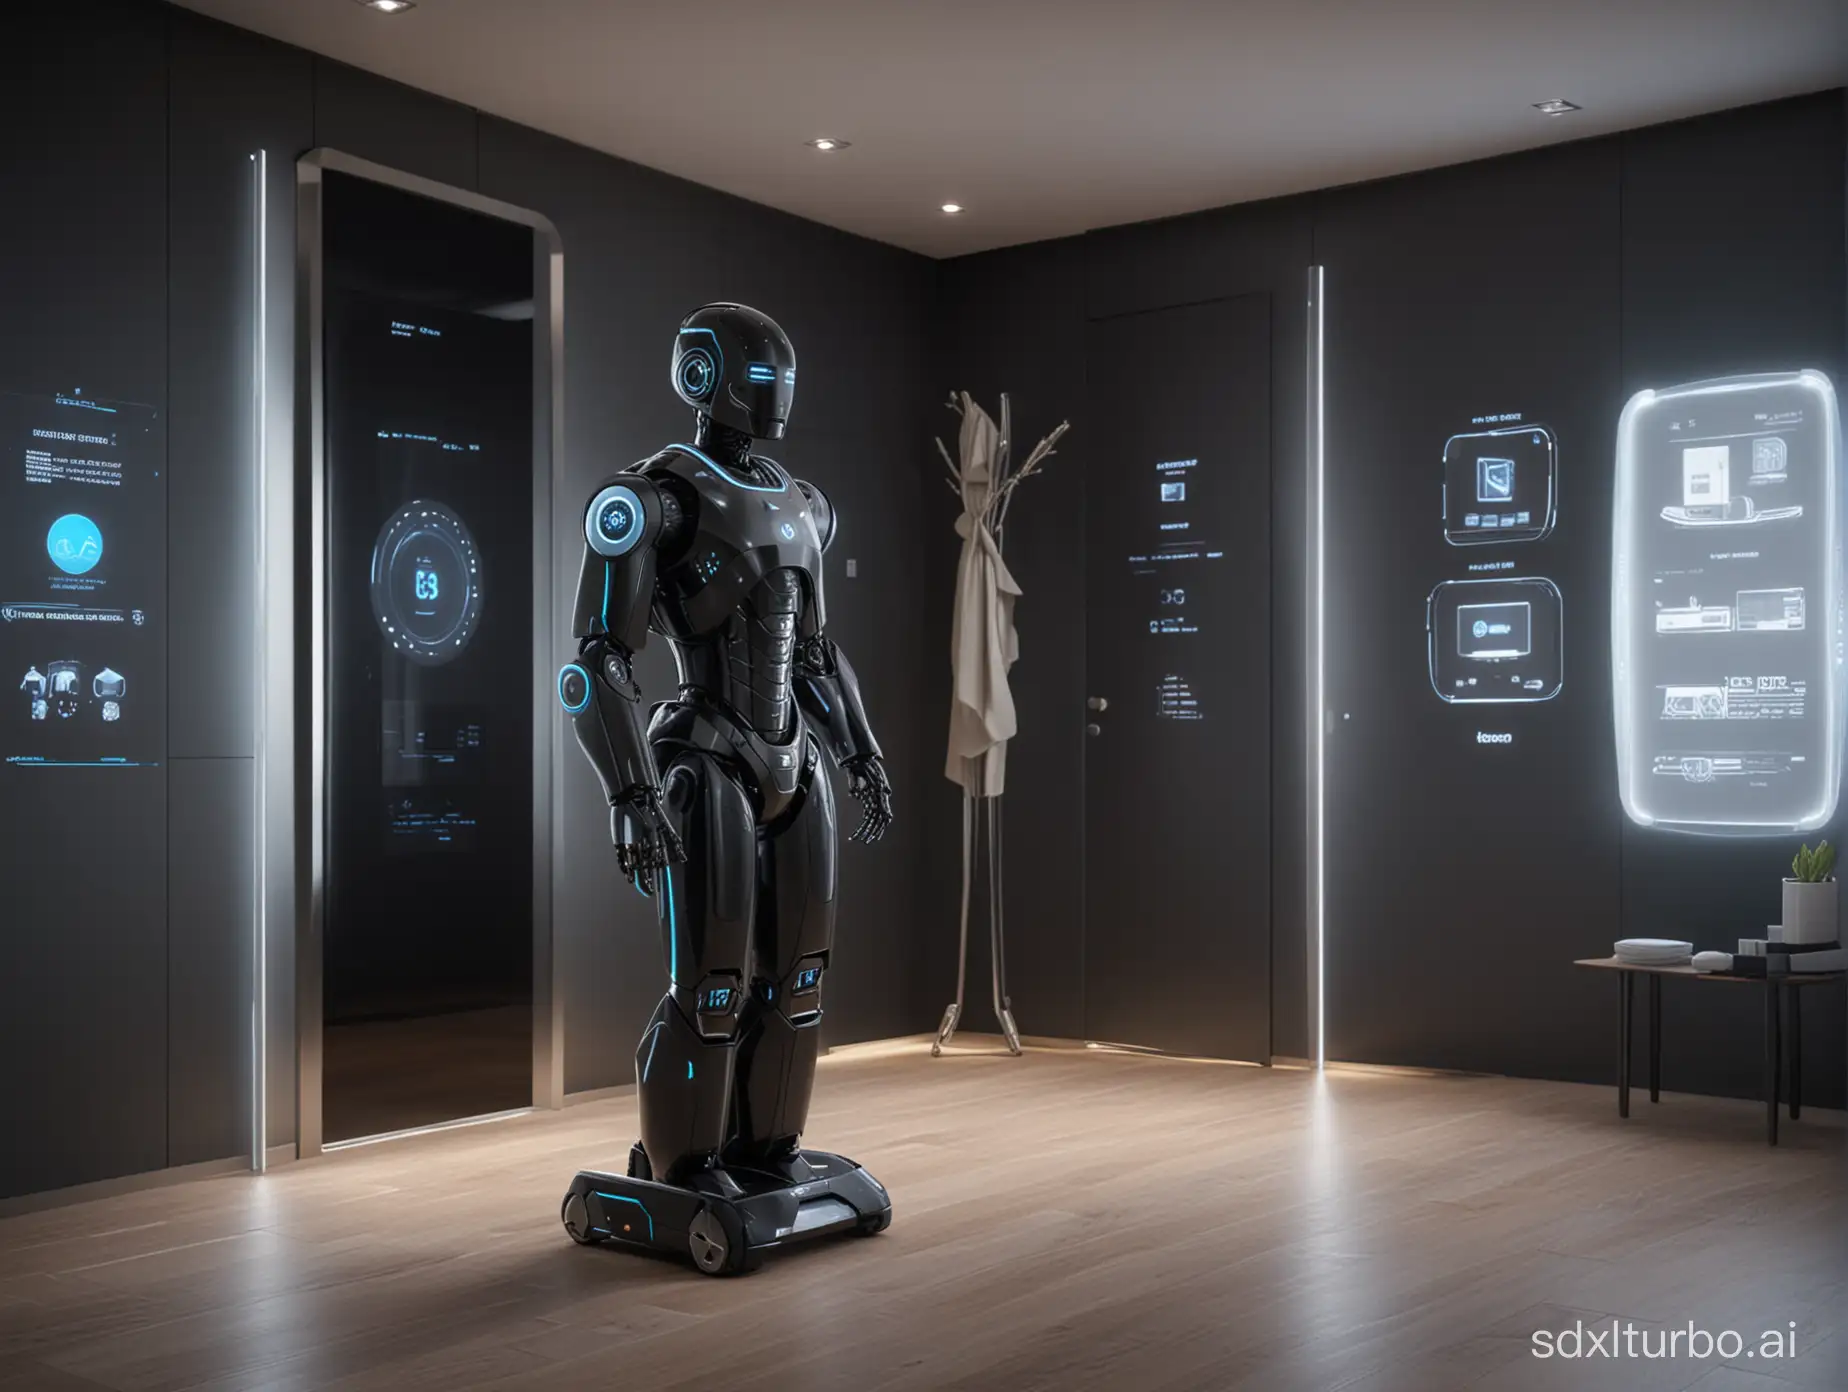 In a futuristic smart home, an advanced robot butler is managing the daily household tasks with precision and efficiency. Its sleek and modern design features an anti-scratch black metallic exterior with multicolored indicator lights and a high-tech touch screen interface on its body. The robot butler's face is a dynamic display screen that can show various emotions and expressions for warm interactions with family members. Its multi-jointed arm design allows it to handle a variety of complex household chores, from preparing meals to tidying up the rooms. In this sci-fi scene, the holographic projections on the walls, the automatically adjusting environmental control systems, and the silently sliding doors together create an efficient and comfortable living